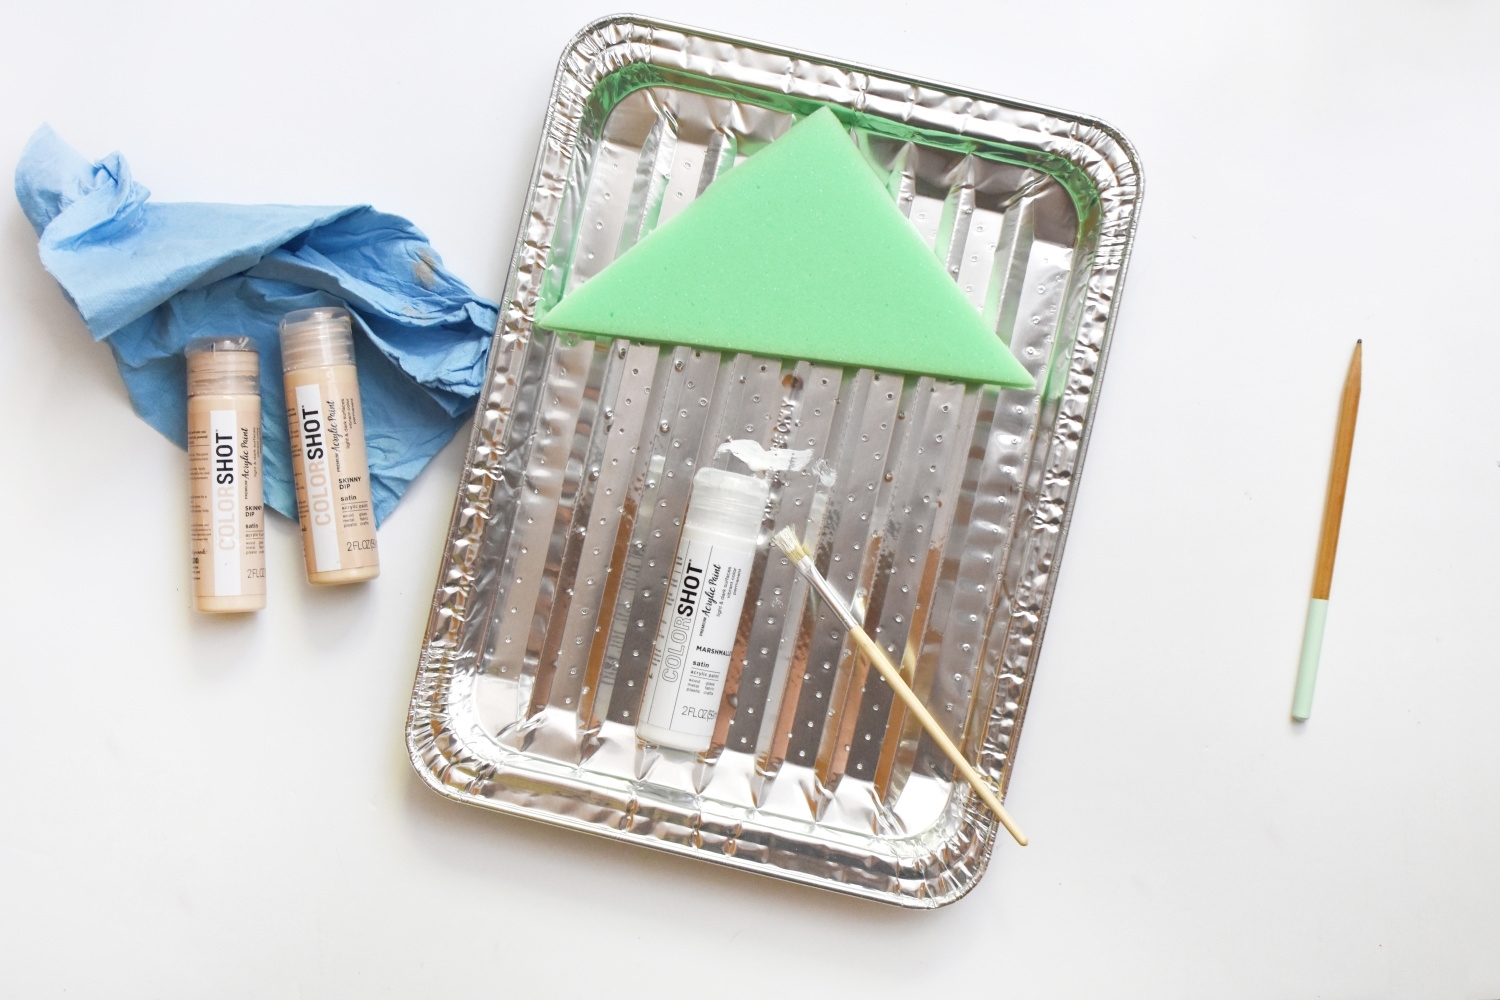 Apply paint to stamps, tapping excess off onto a disposable tray